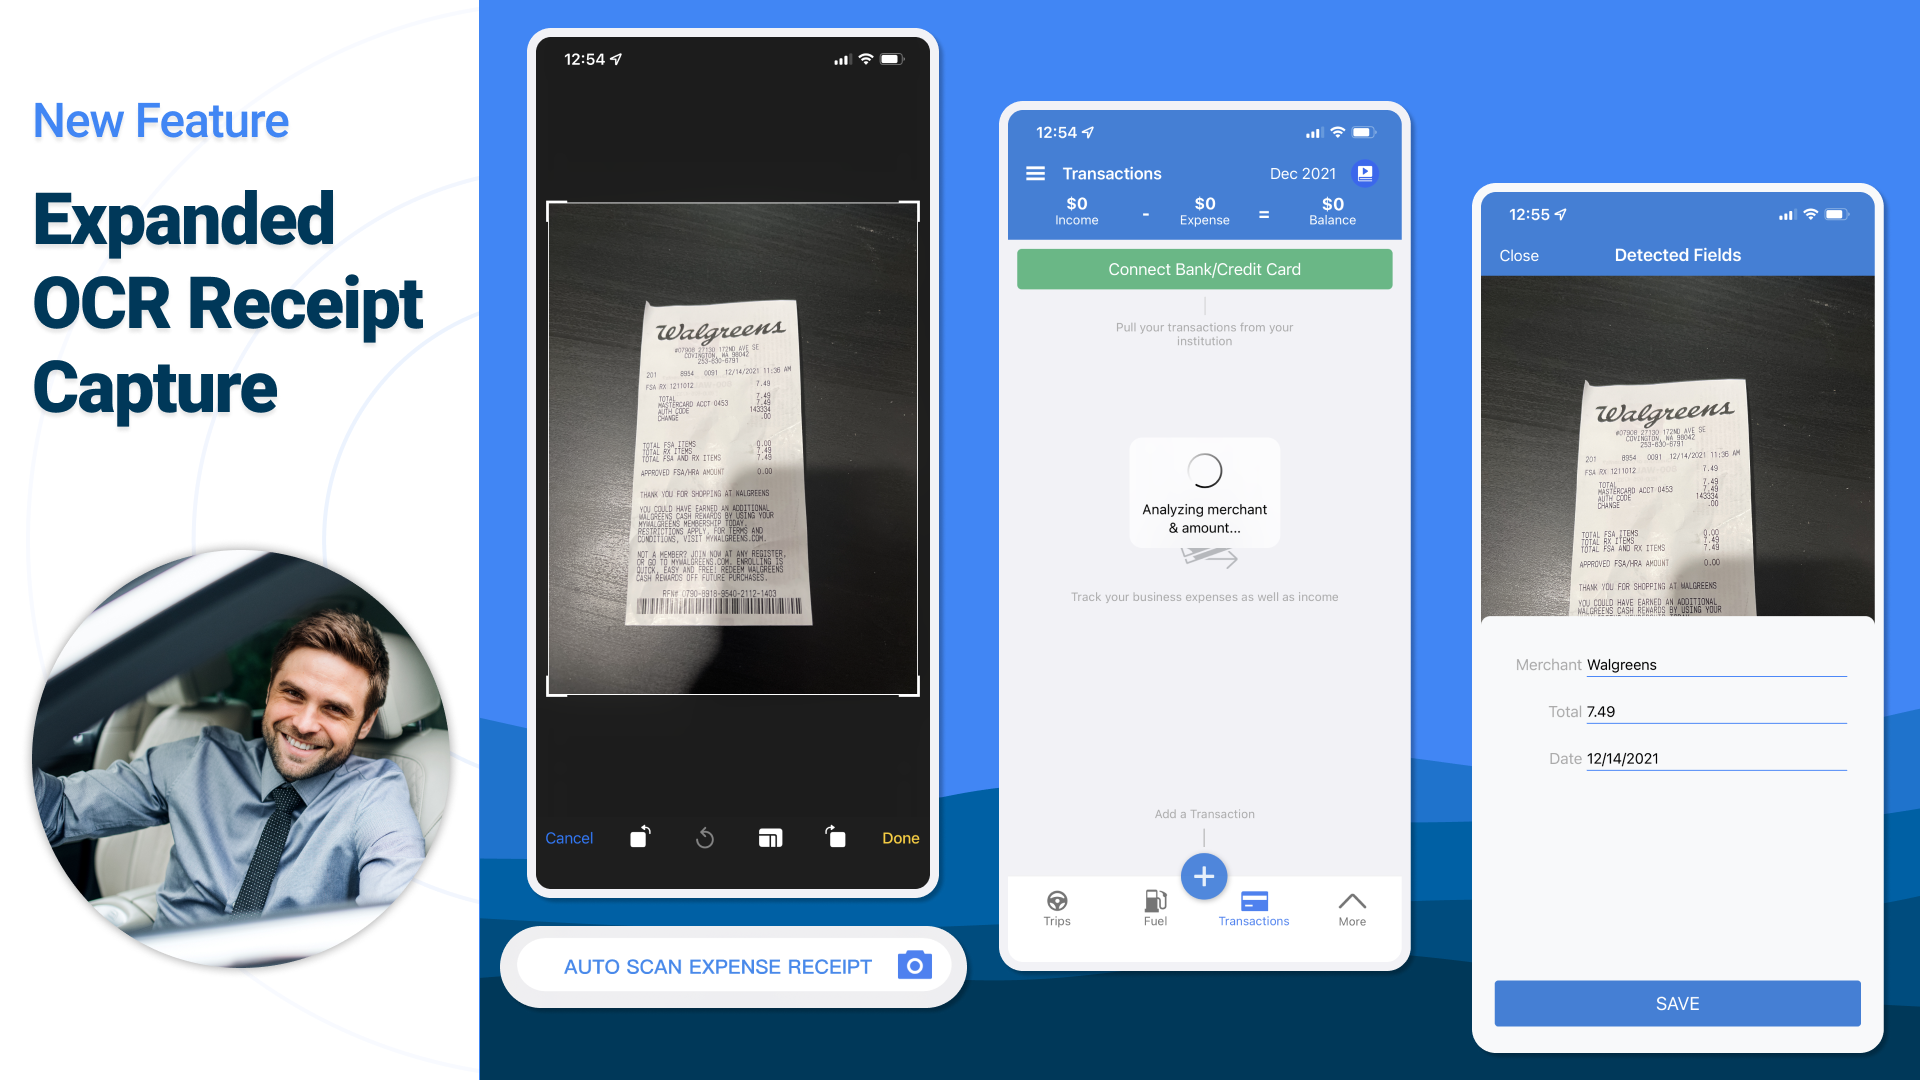 Smart Scan Expense Receipts With OCR Text Recognition